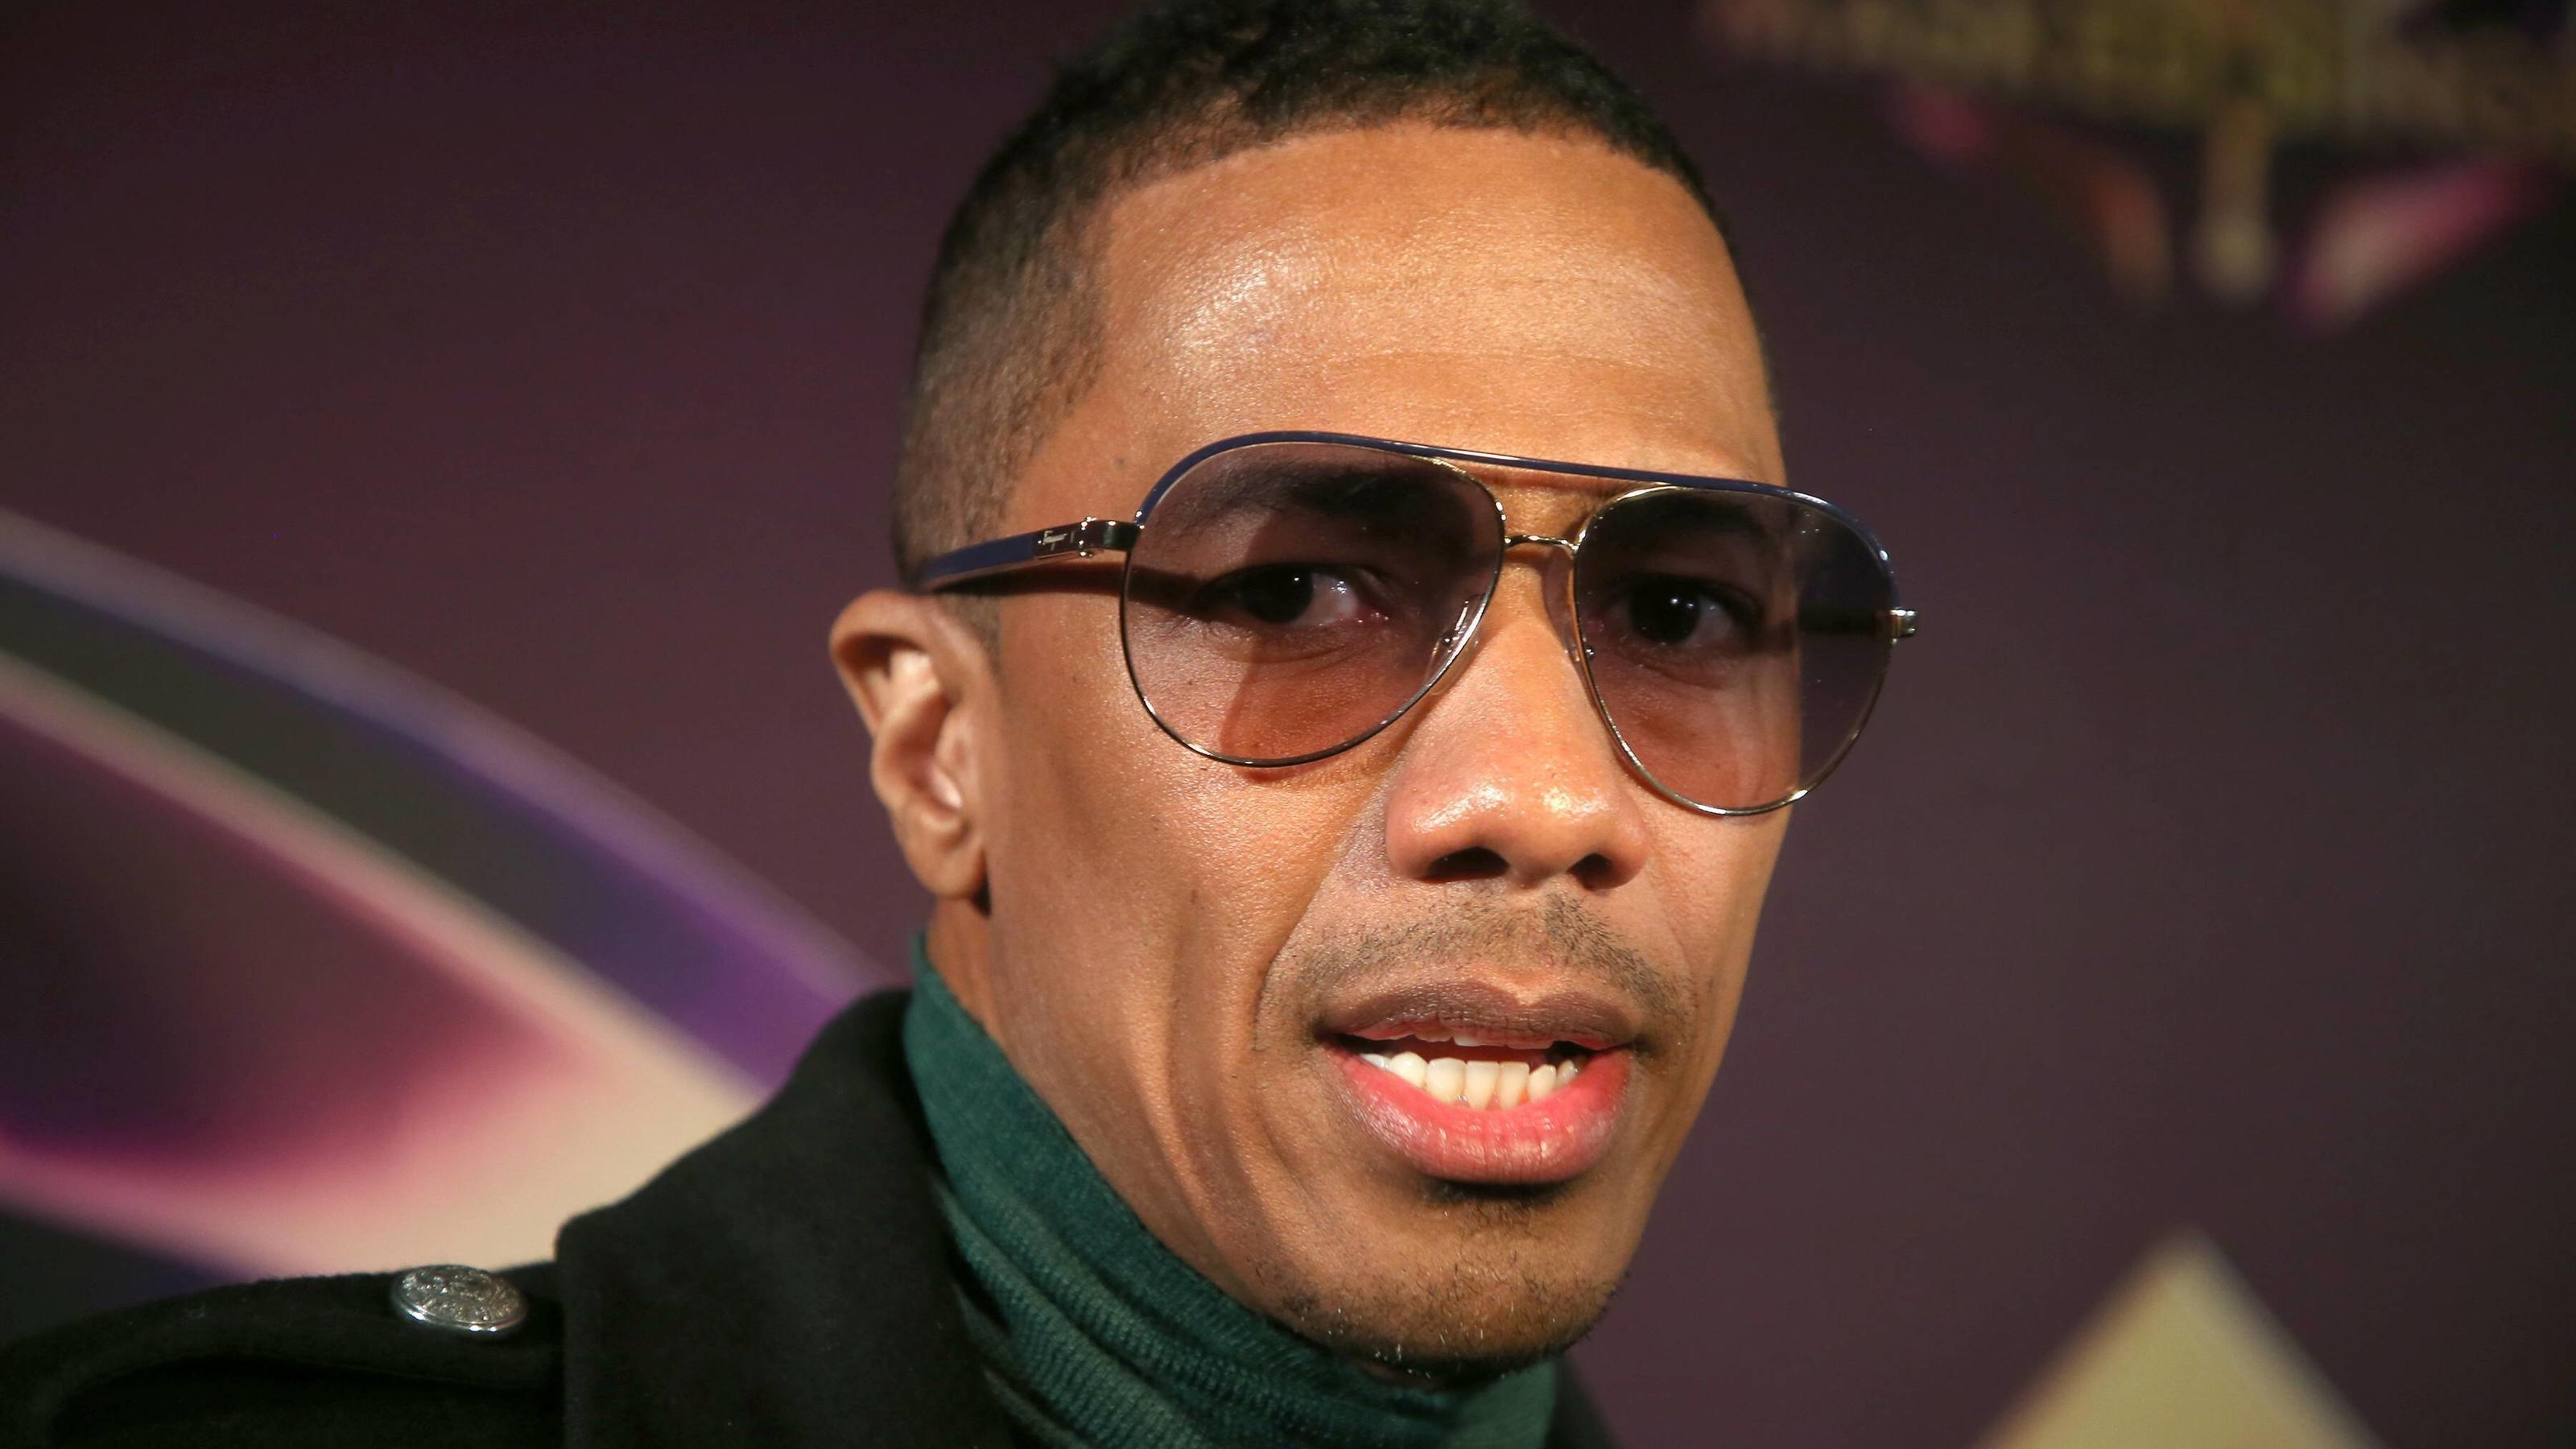 Nick Cannon, Publicized grieving, Openly mourning, Sharing personal struggles, 3200x1800 HD Desktop